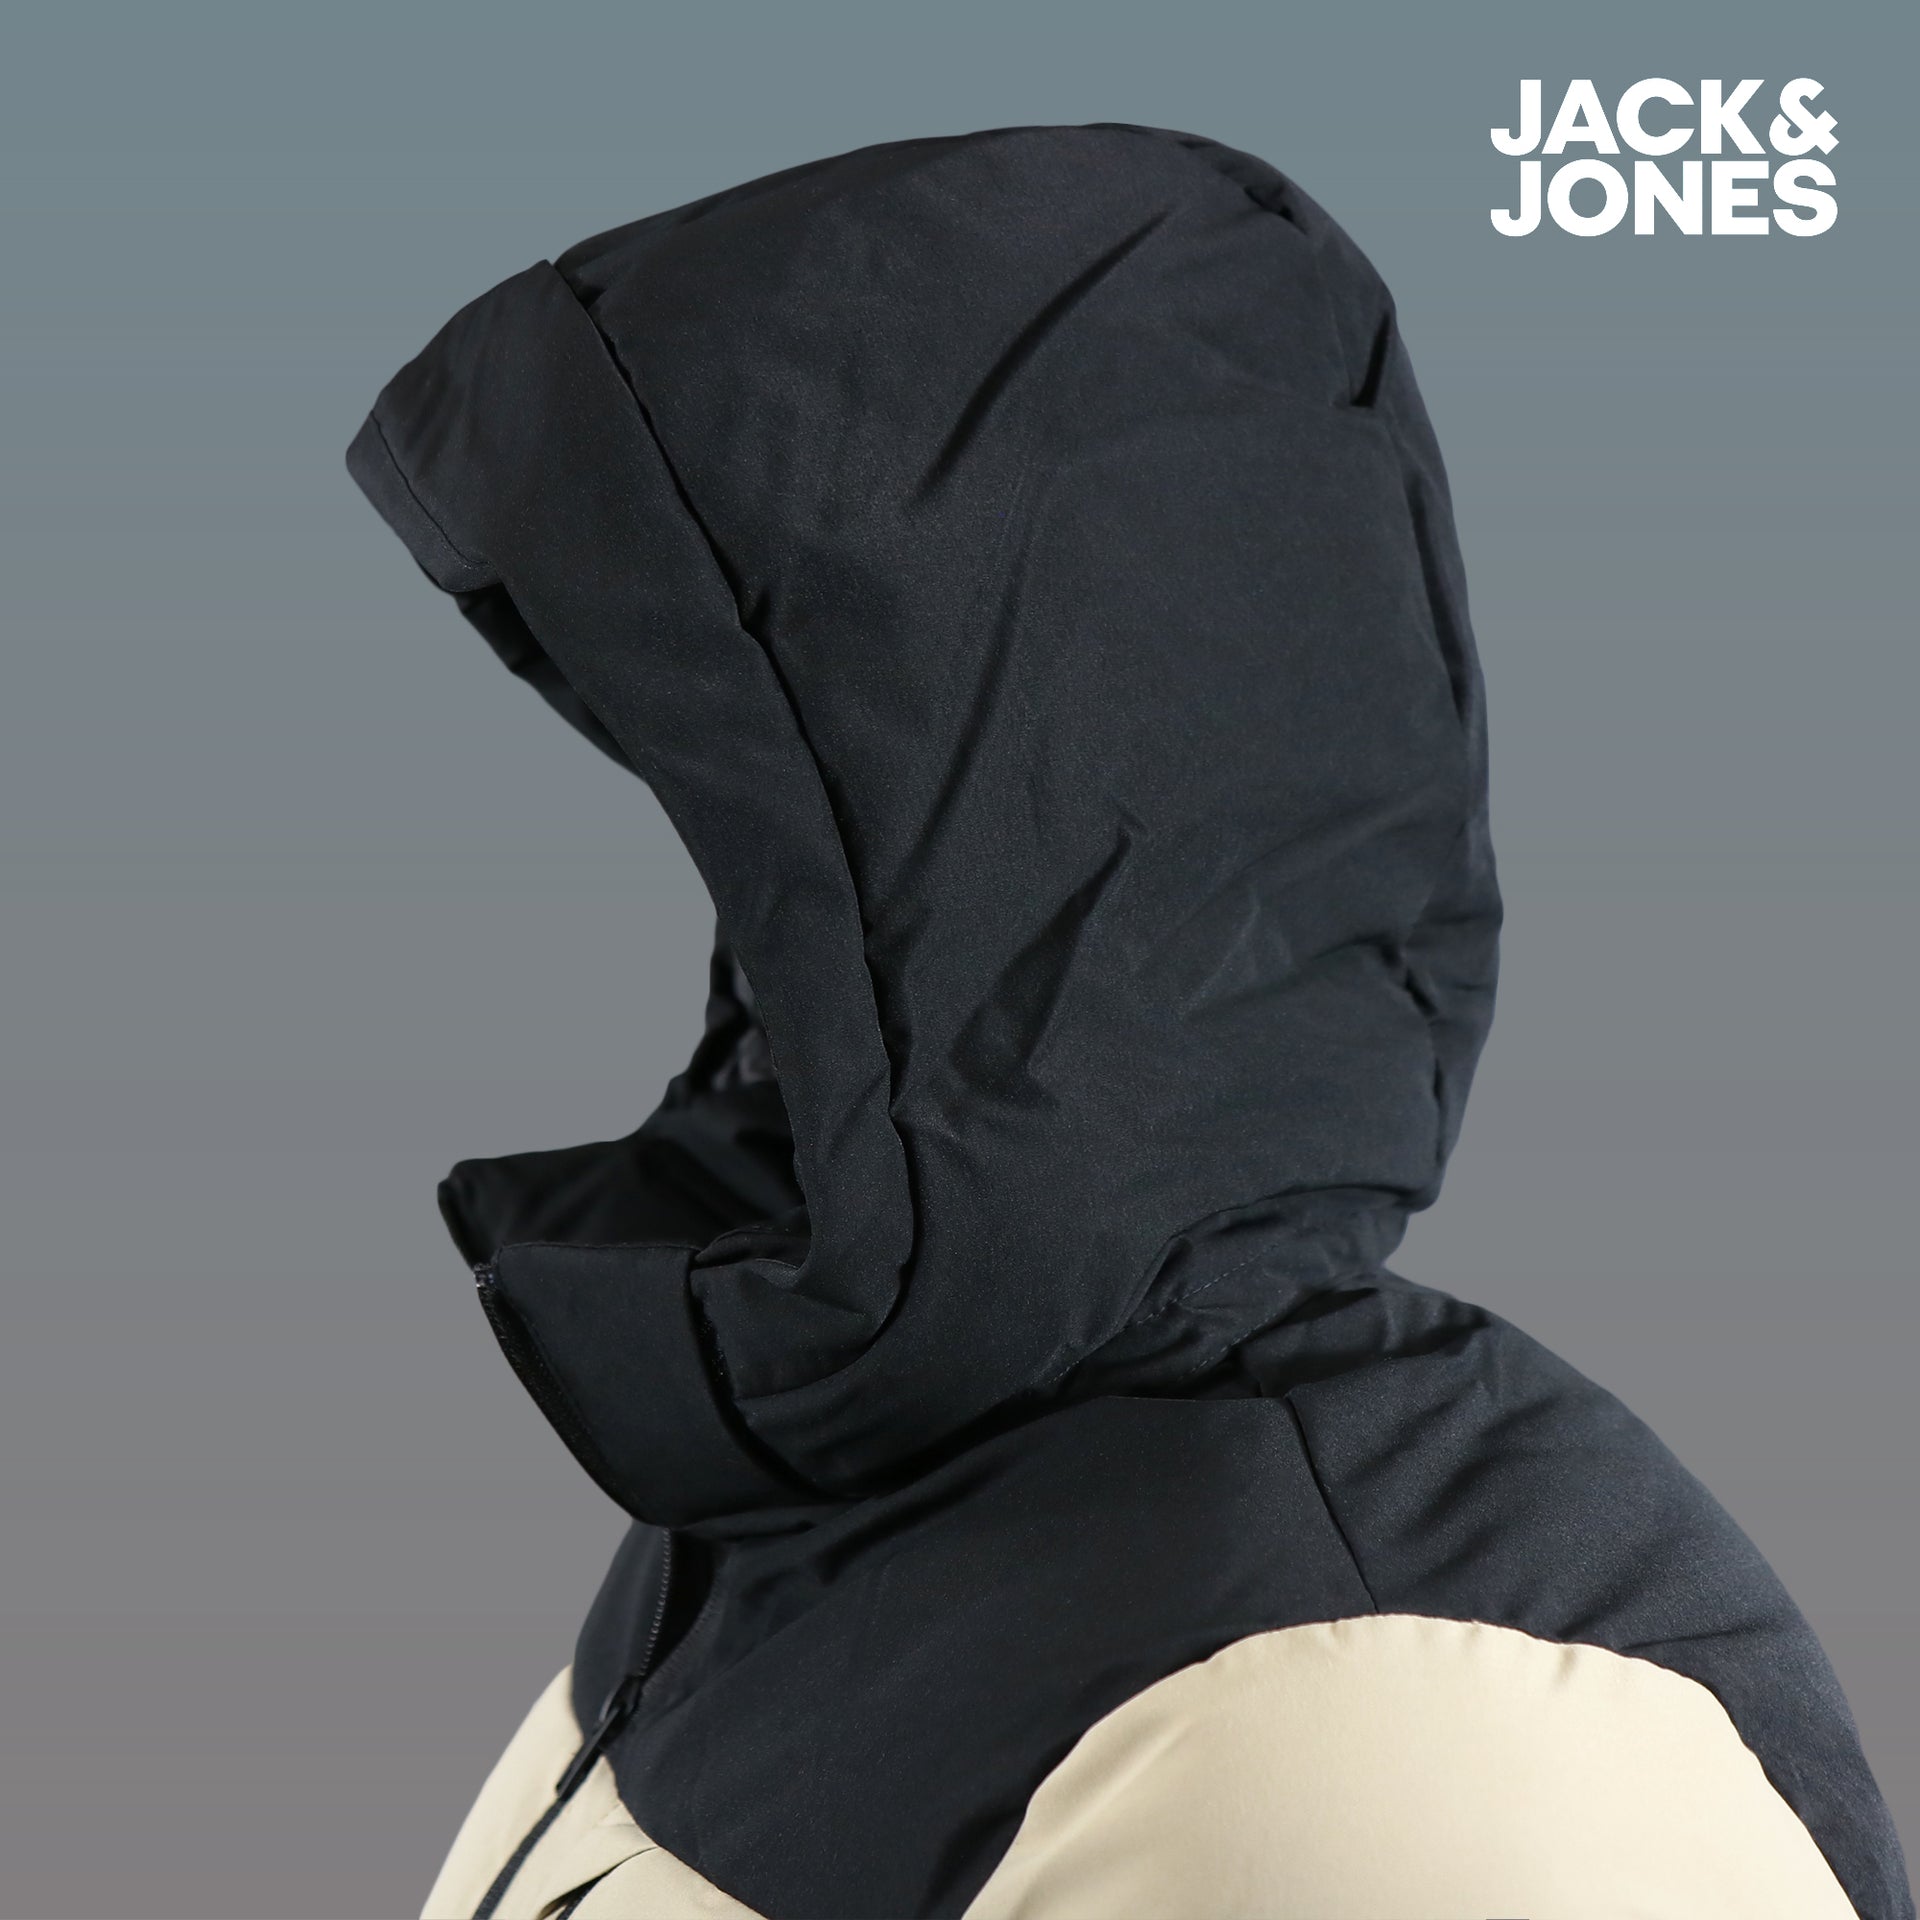 The hood on the Jack And Jones Dune Puffer Jacket With Hidden Pocket | Black and Tan Puffer Jacket